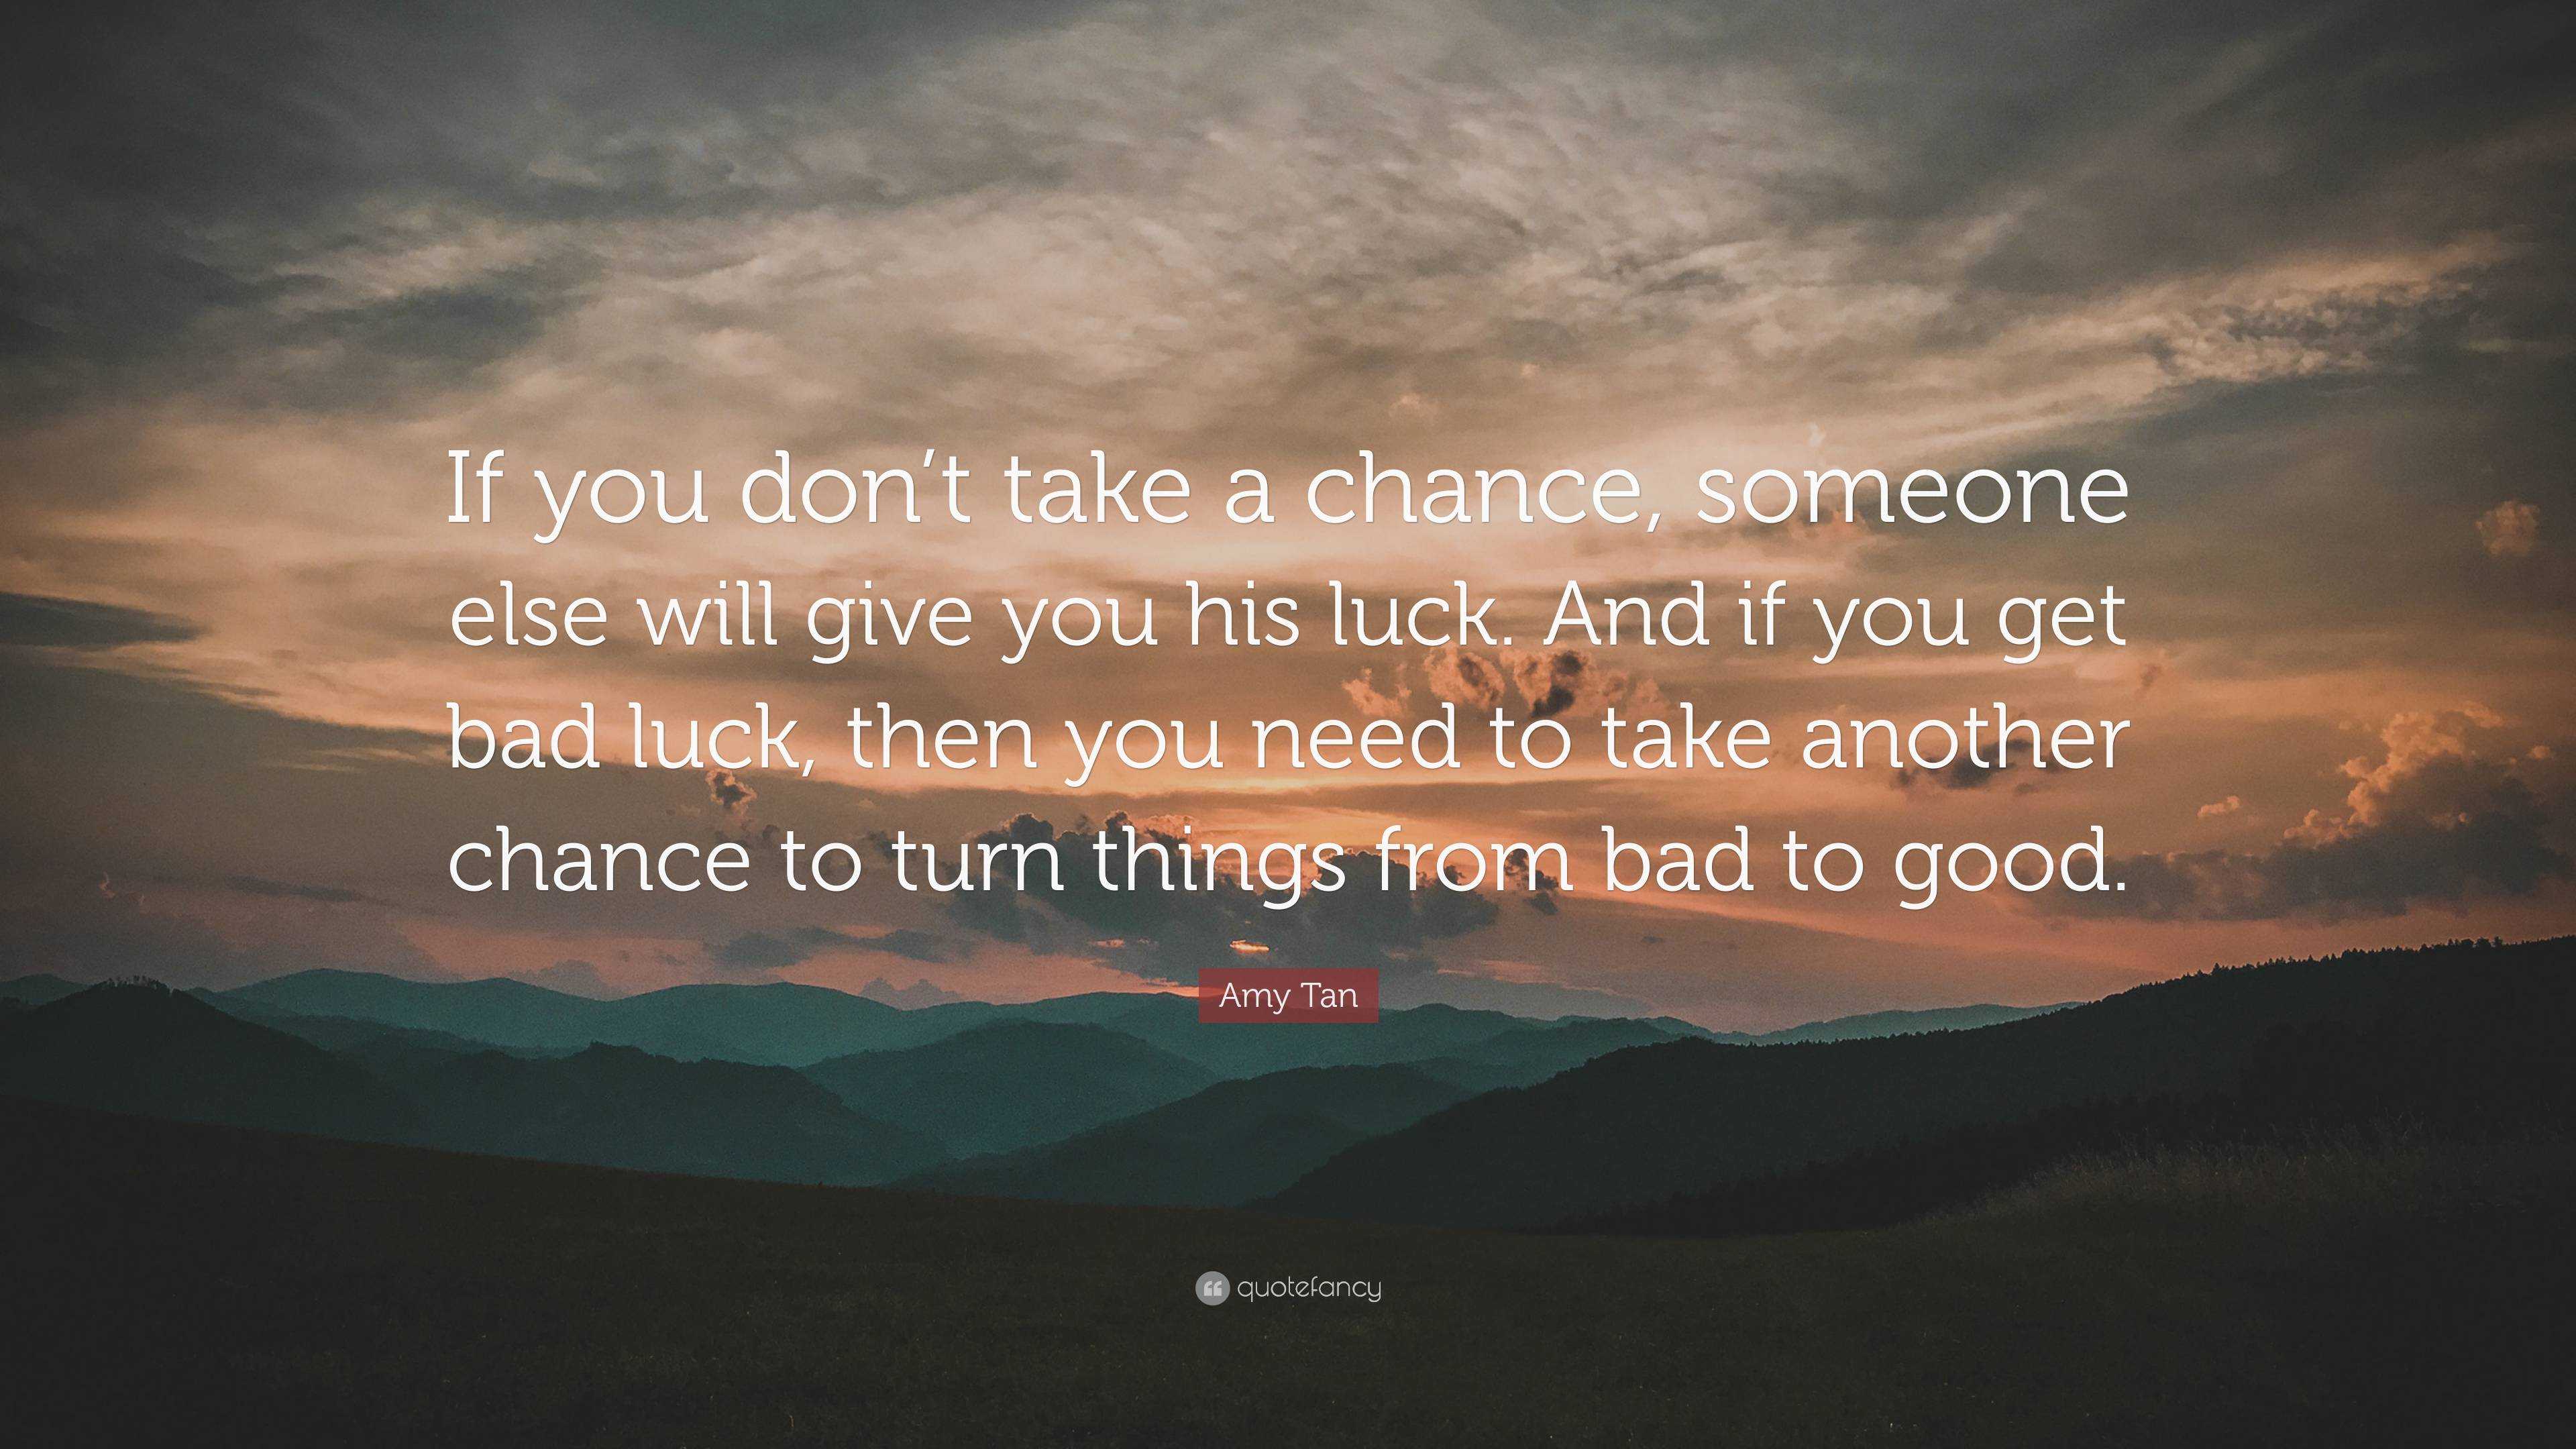 Amy Tan Quote: “If you don't take a chance, someone else will give you his  luck. And if you get bad luck, then you need to take another ”